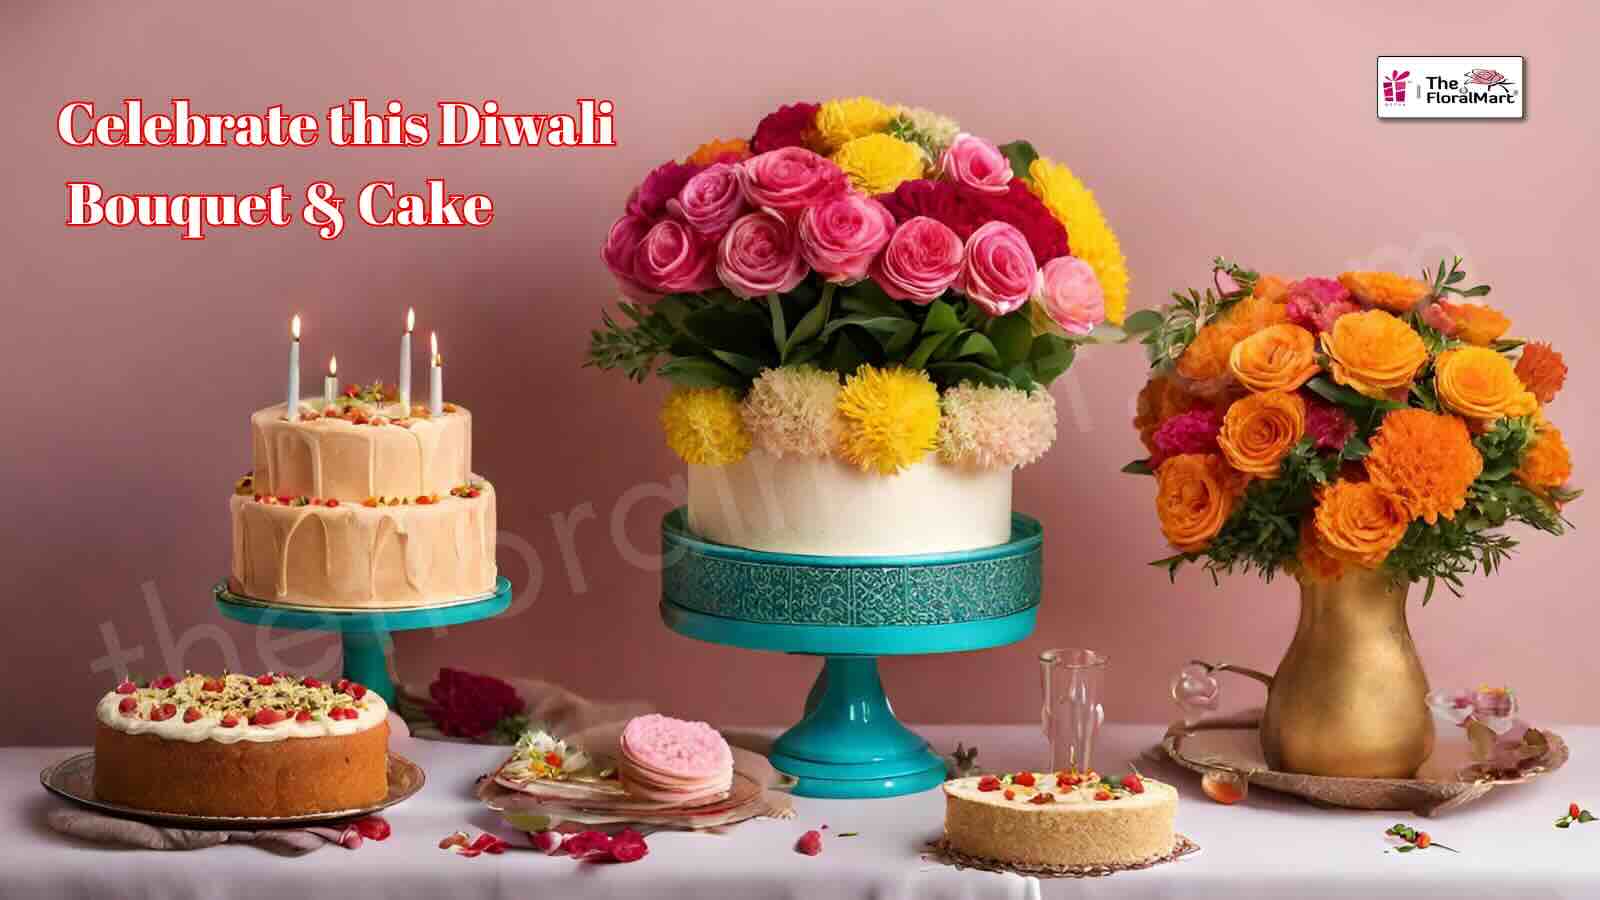 Celebrate Diwali with Elegance: Floral and Cake Gifts That Spark Joy - The  FloralMart